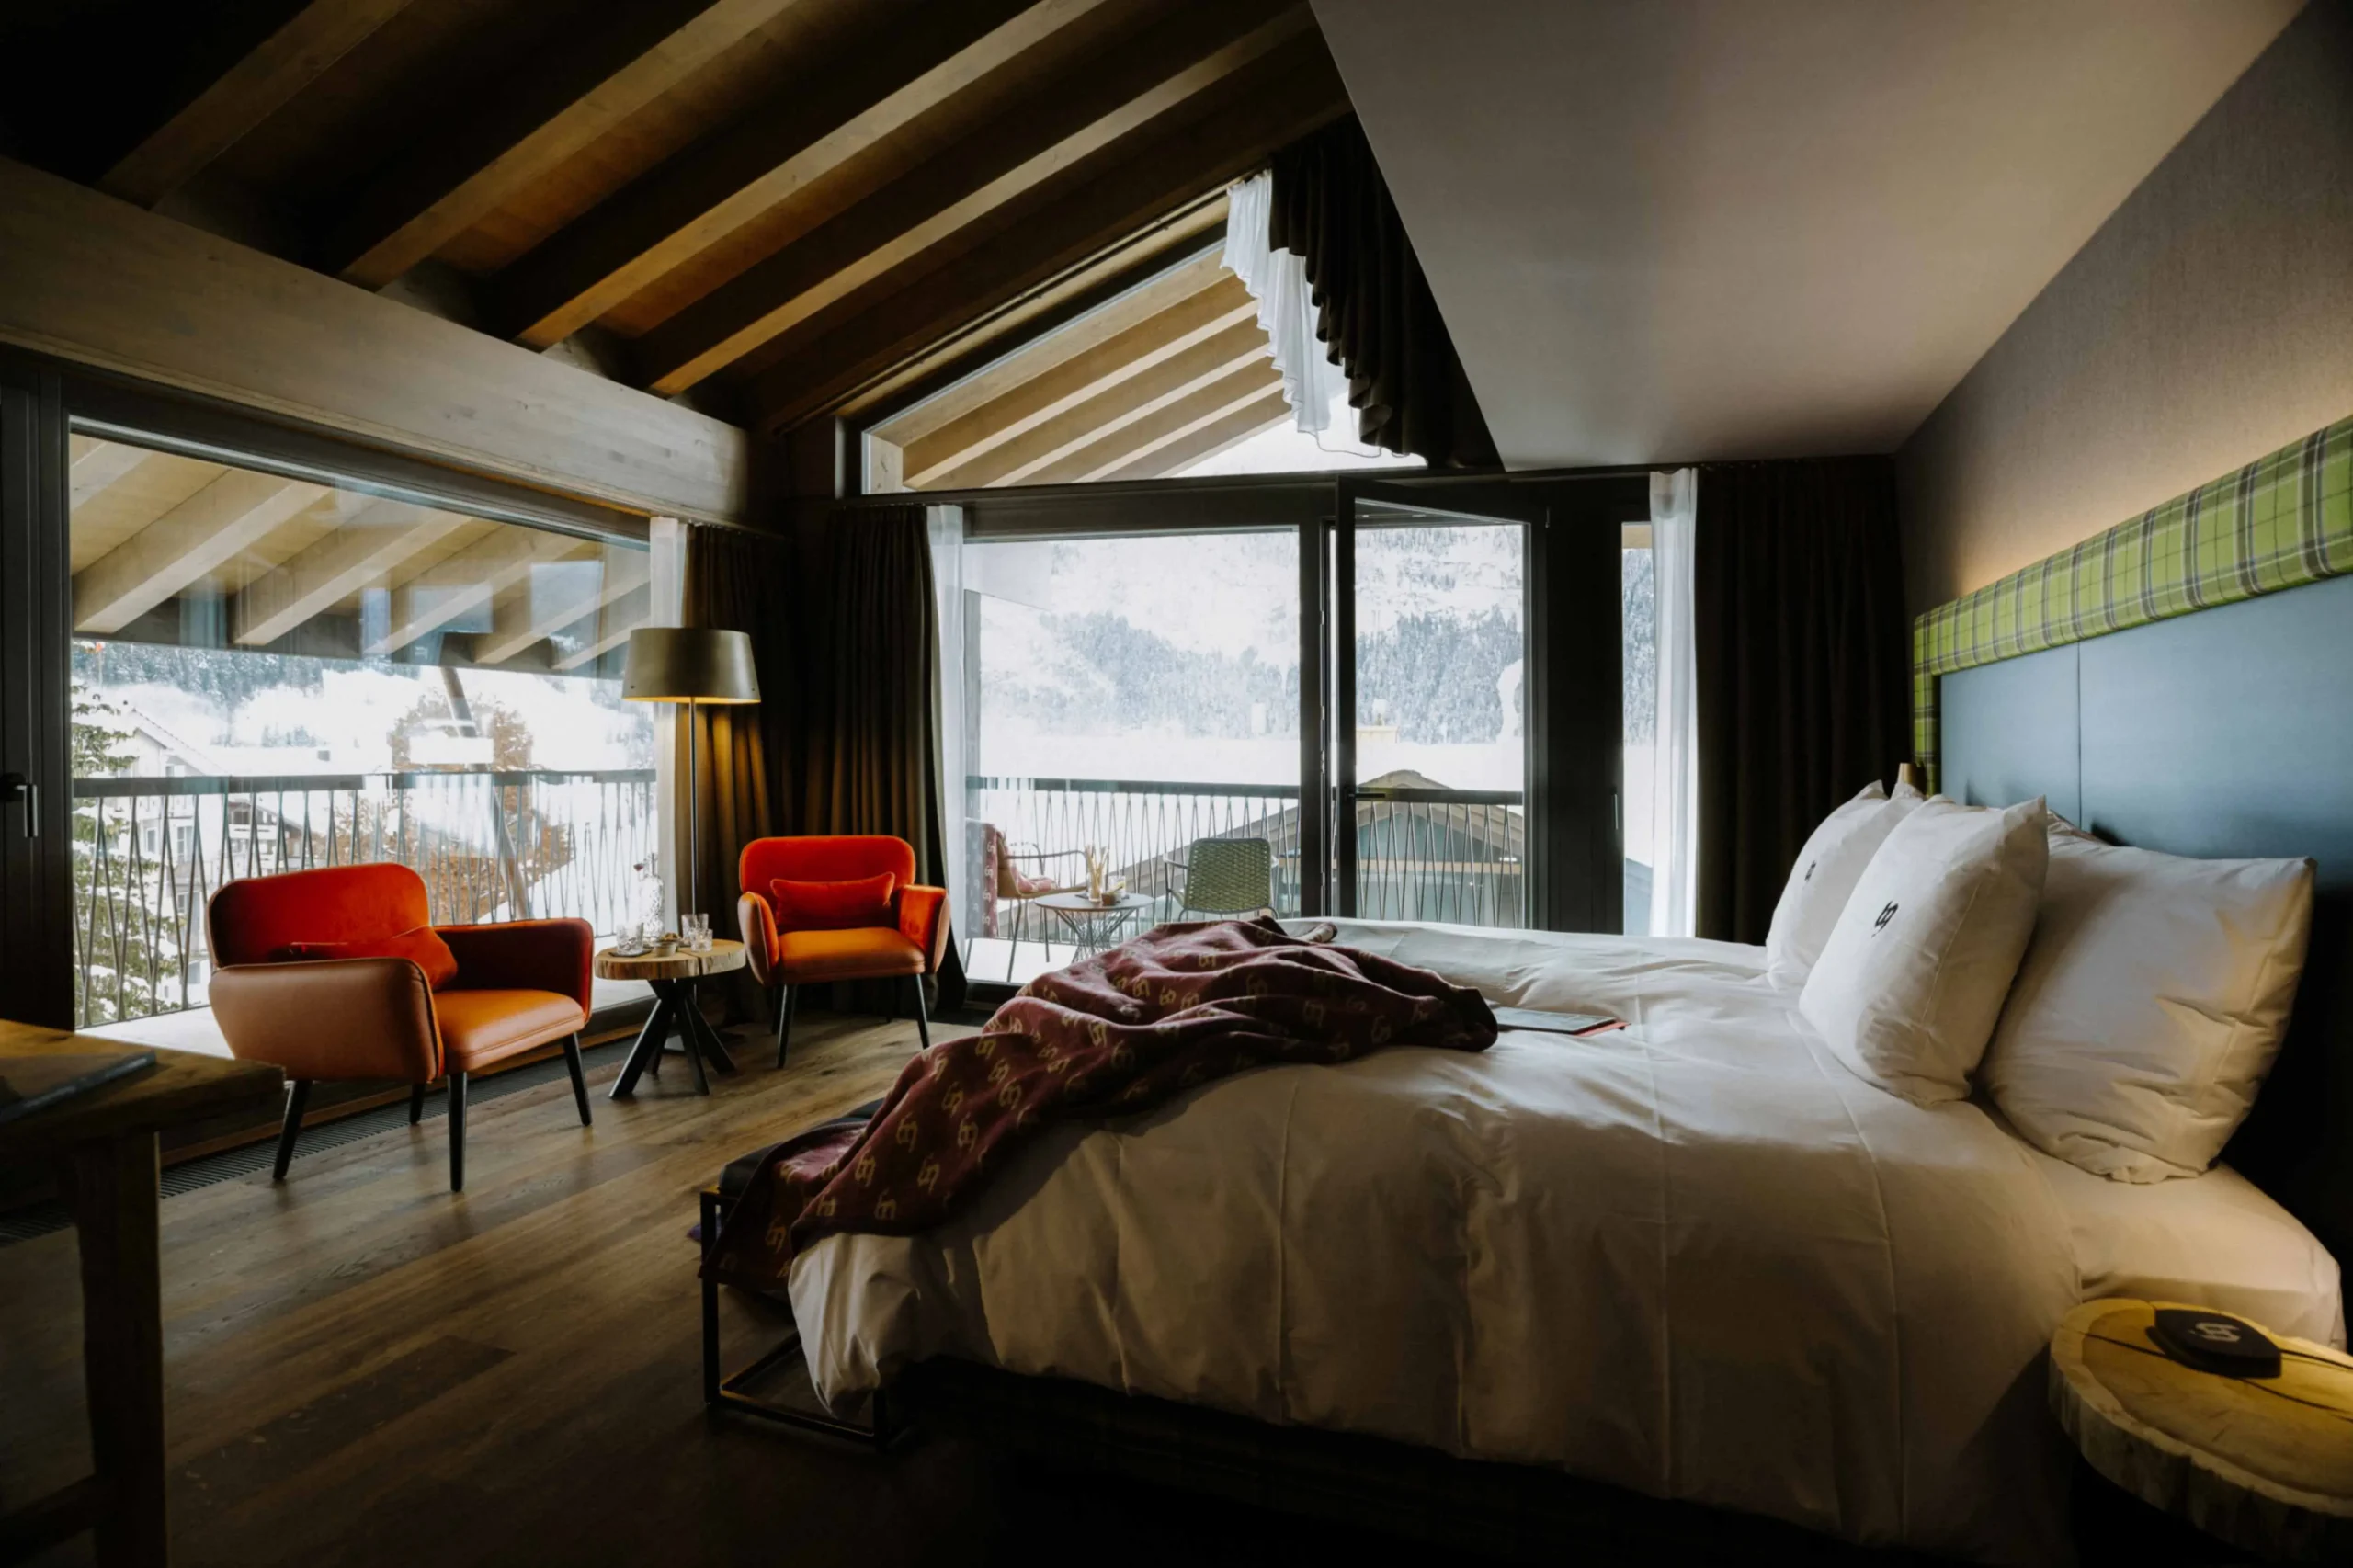 A modern and stylish room of Bergwelt Grindelwald Alpine Design with a plush bed, elegant wooden accents, and expansive windows that open up to a stunning view of the snowy Grindelwald mountains, blending luxury with alpine charm.